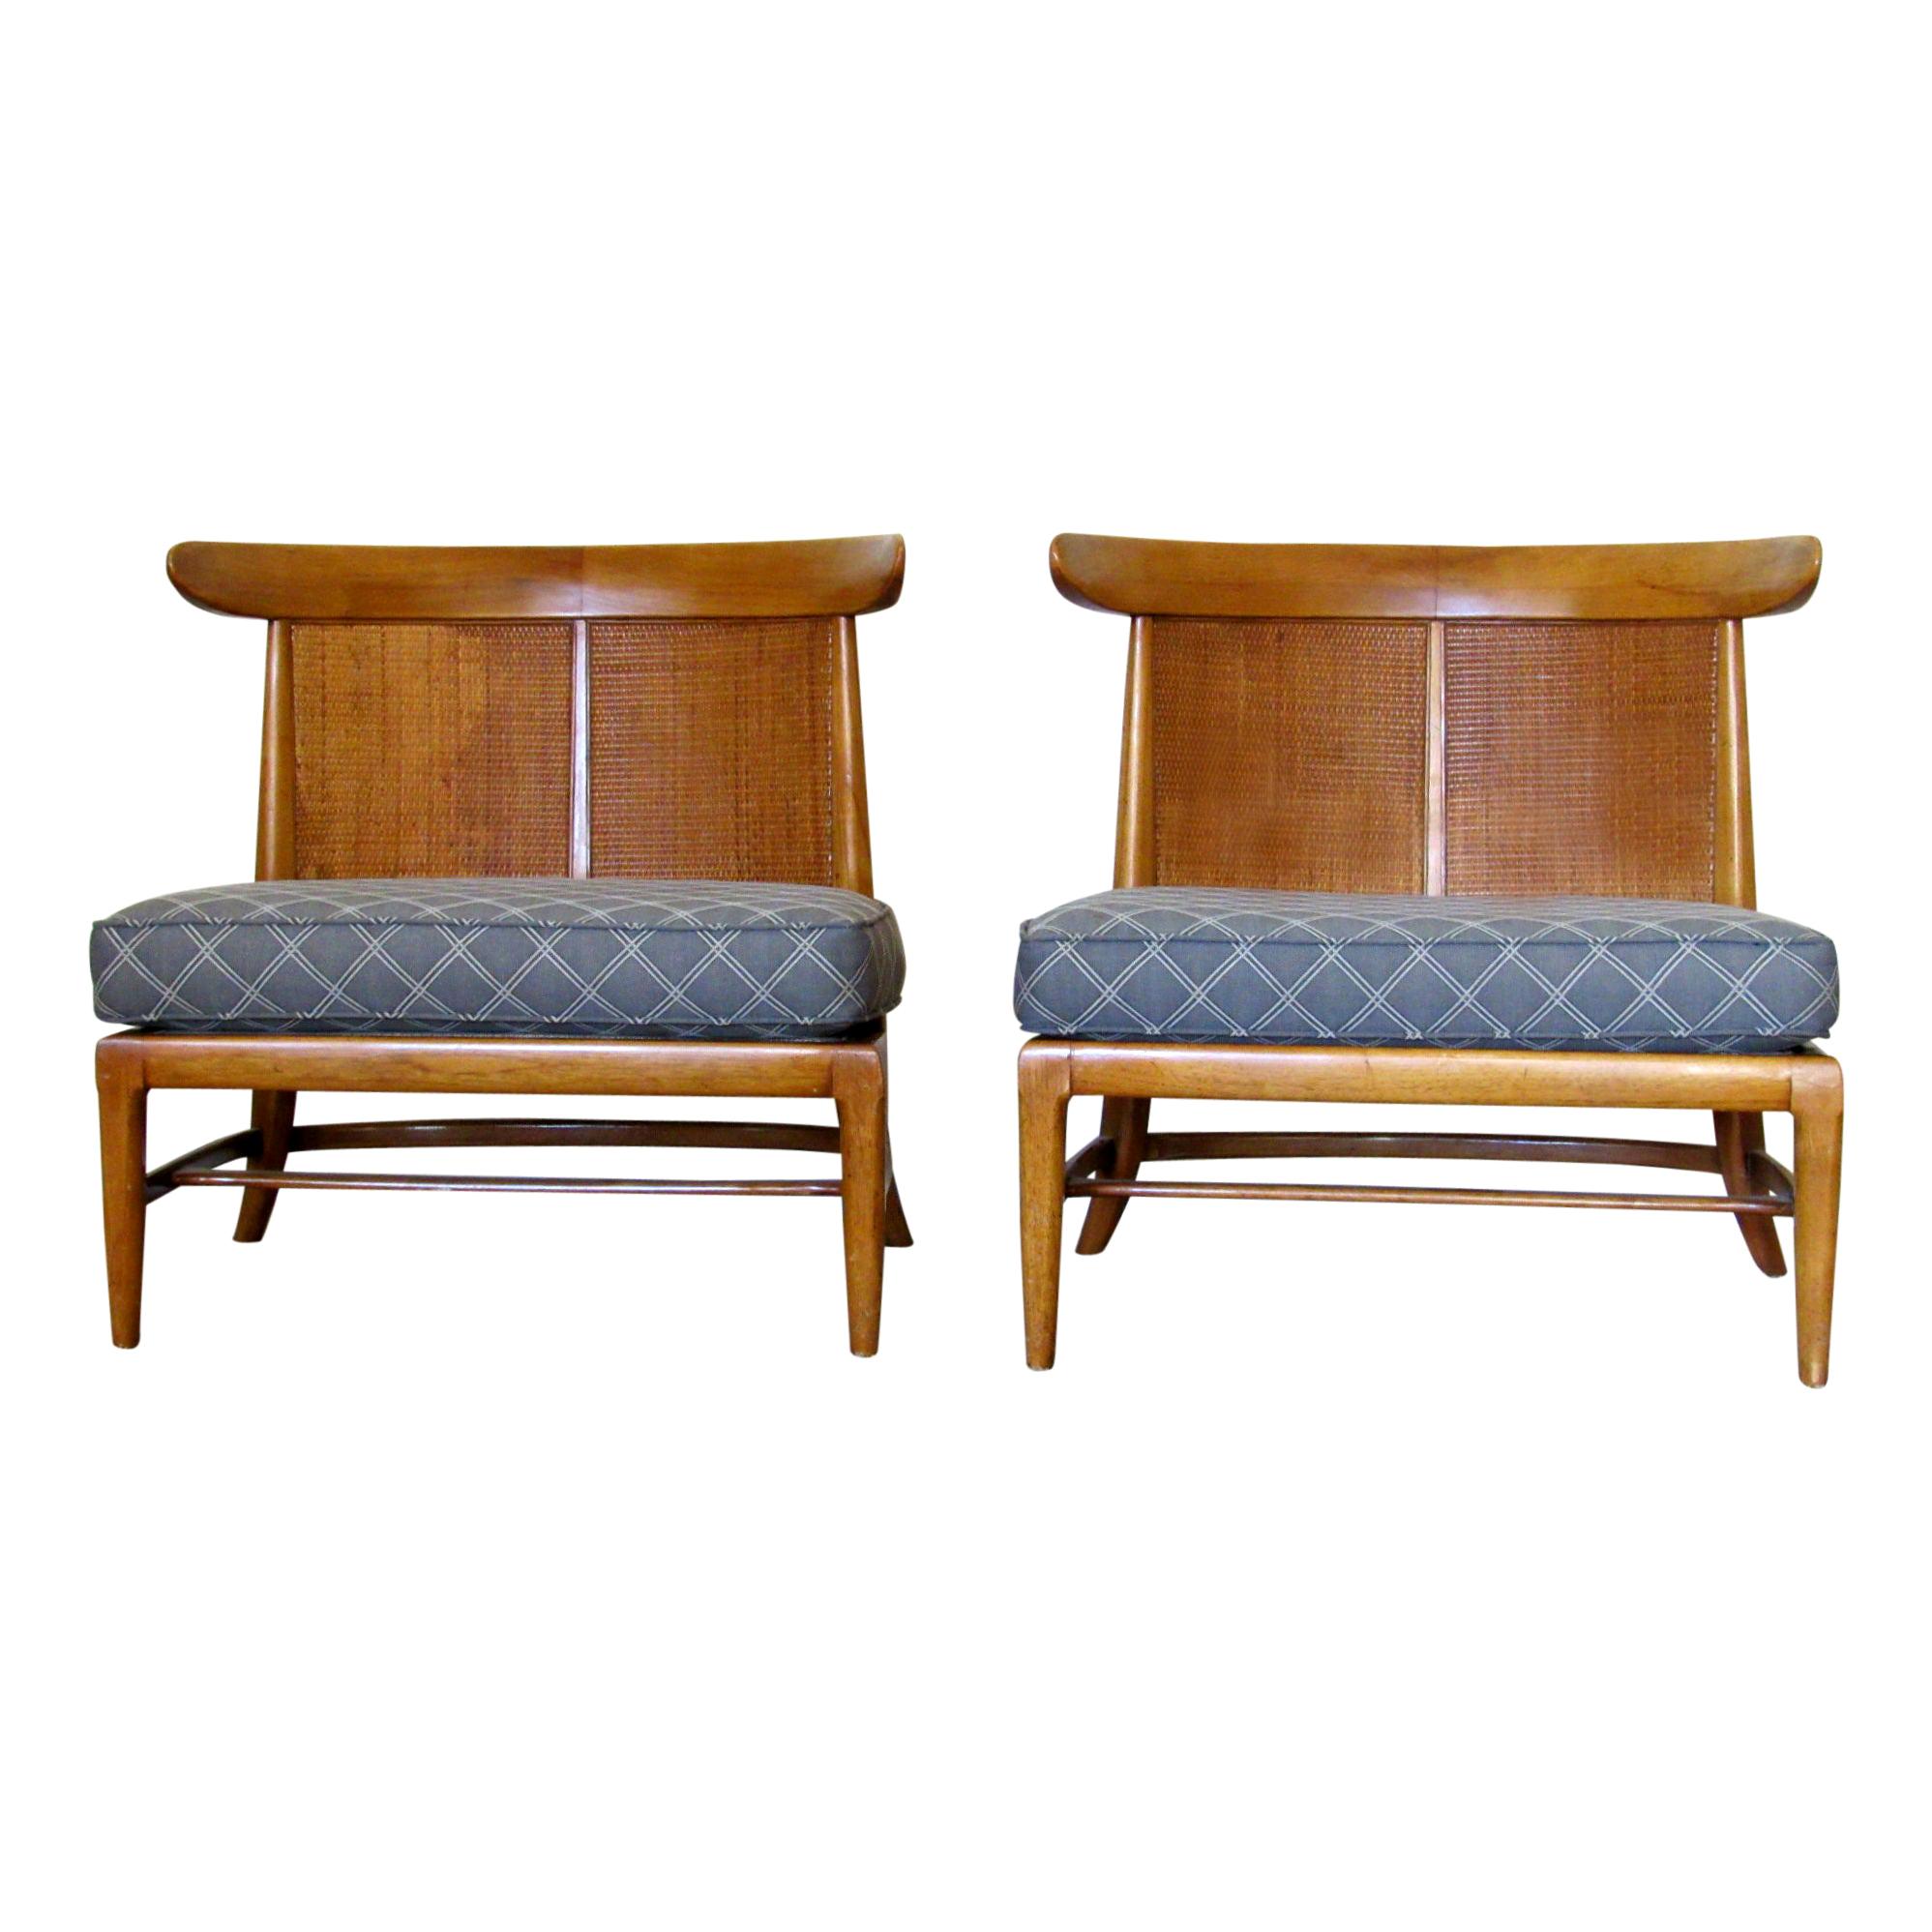 Four Mid Century Modern Vintage Tomlinson Sophisticate Slipper Club Chairs. These chairs are the bomb! A rare set of four of the chic 1950's Tomlinson Sophisticate slipper chairs in original condition.  These have been in the same loving home for